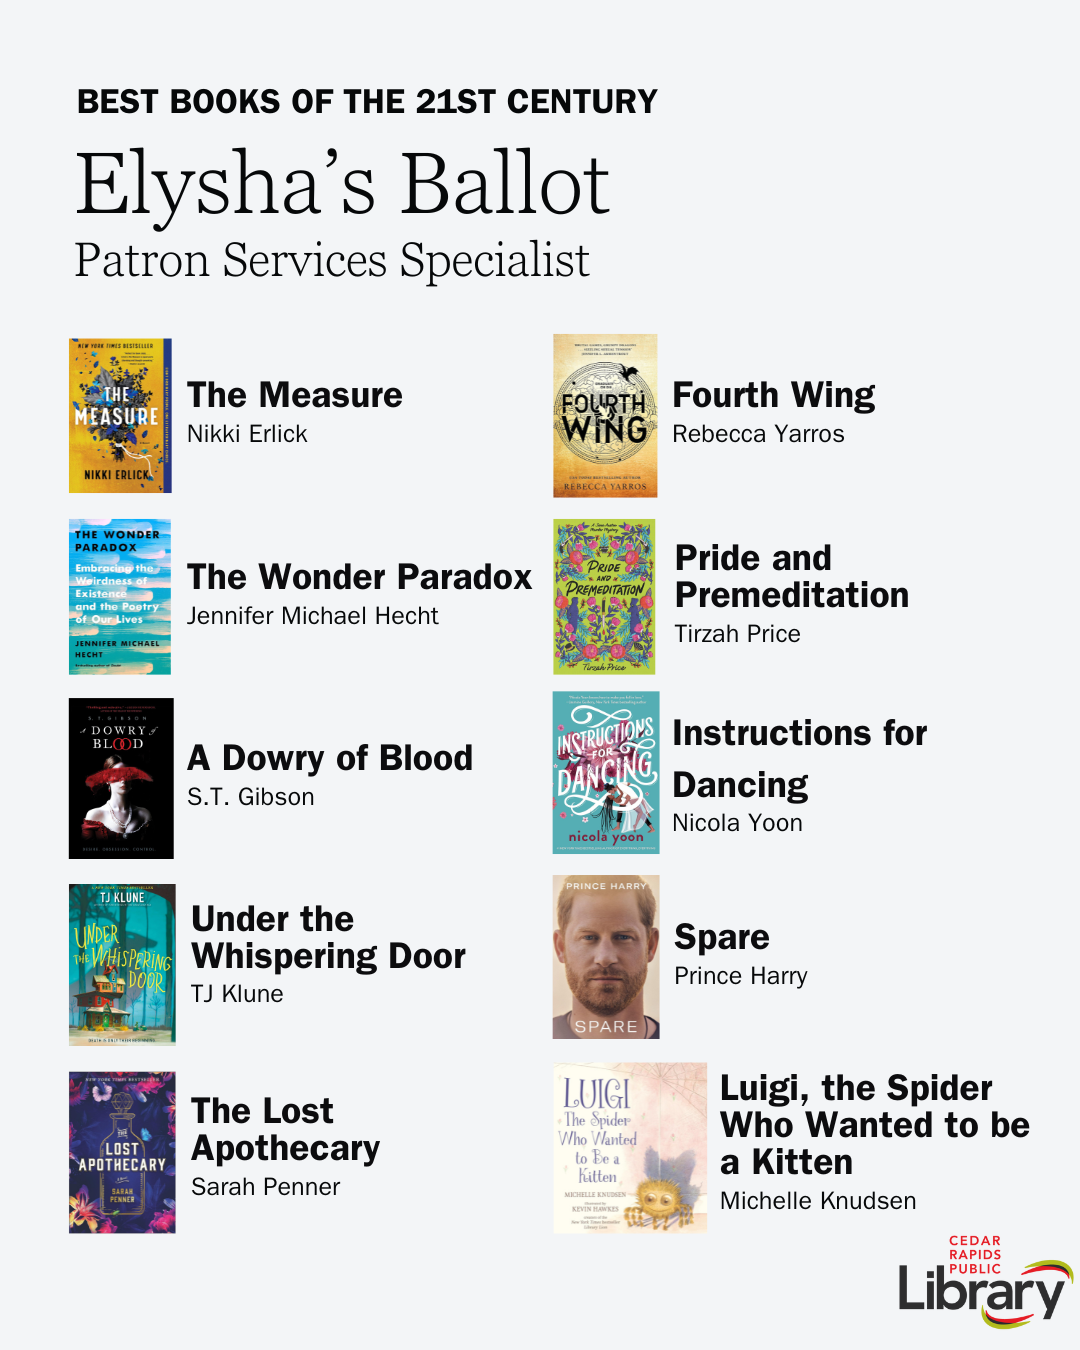 A graphic shows Patron Services Specialist Elysha's Ballot for Best Books of the 21st Century